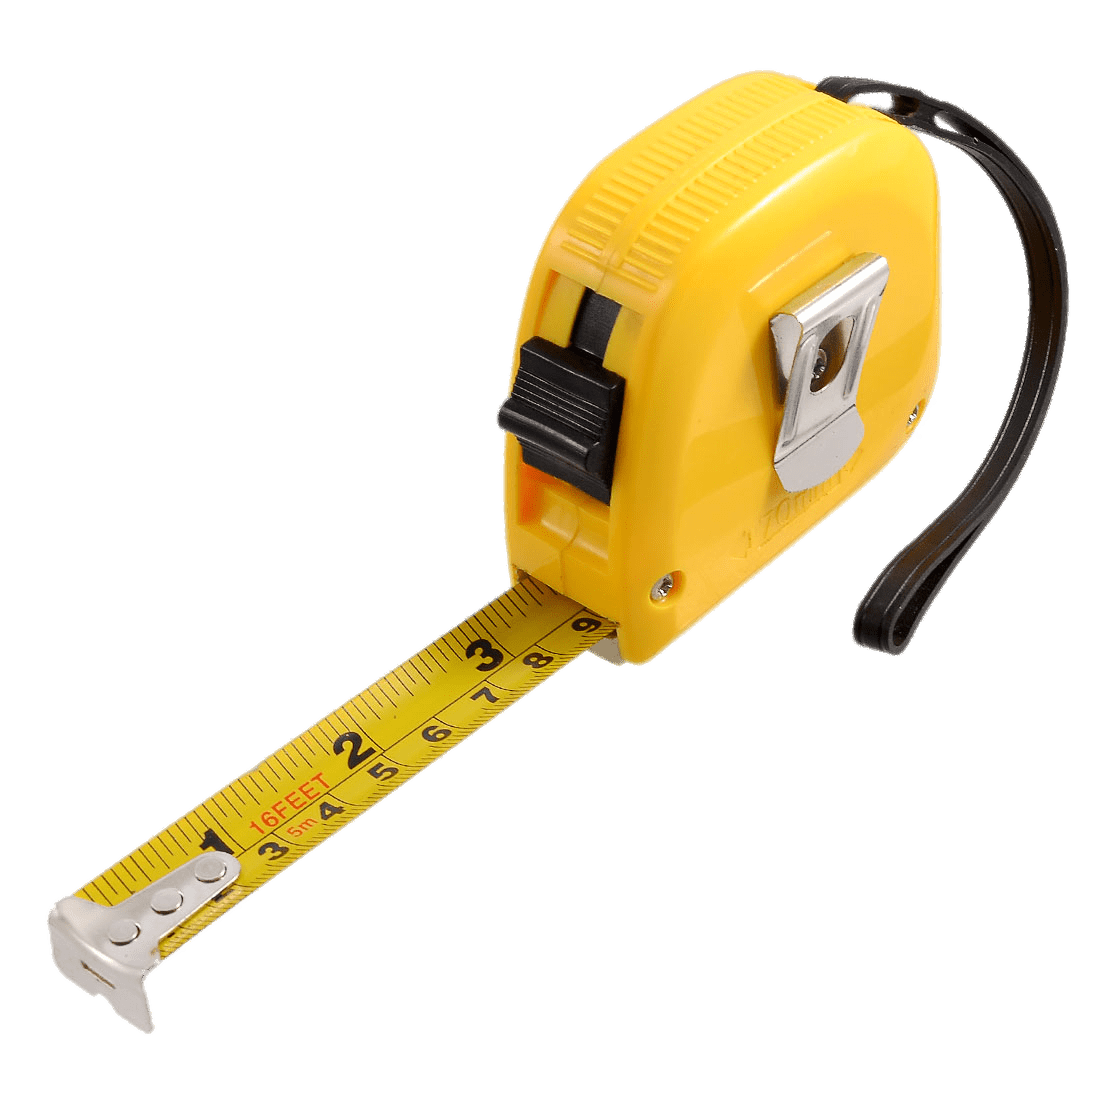 Measuring Tape Png Images Transparent Background Png Play Images